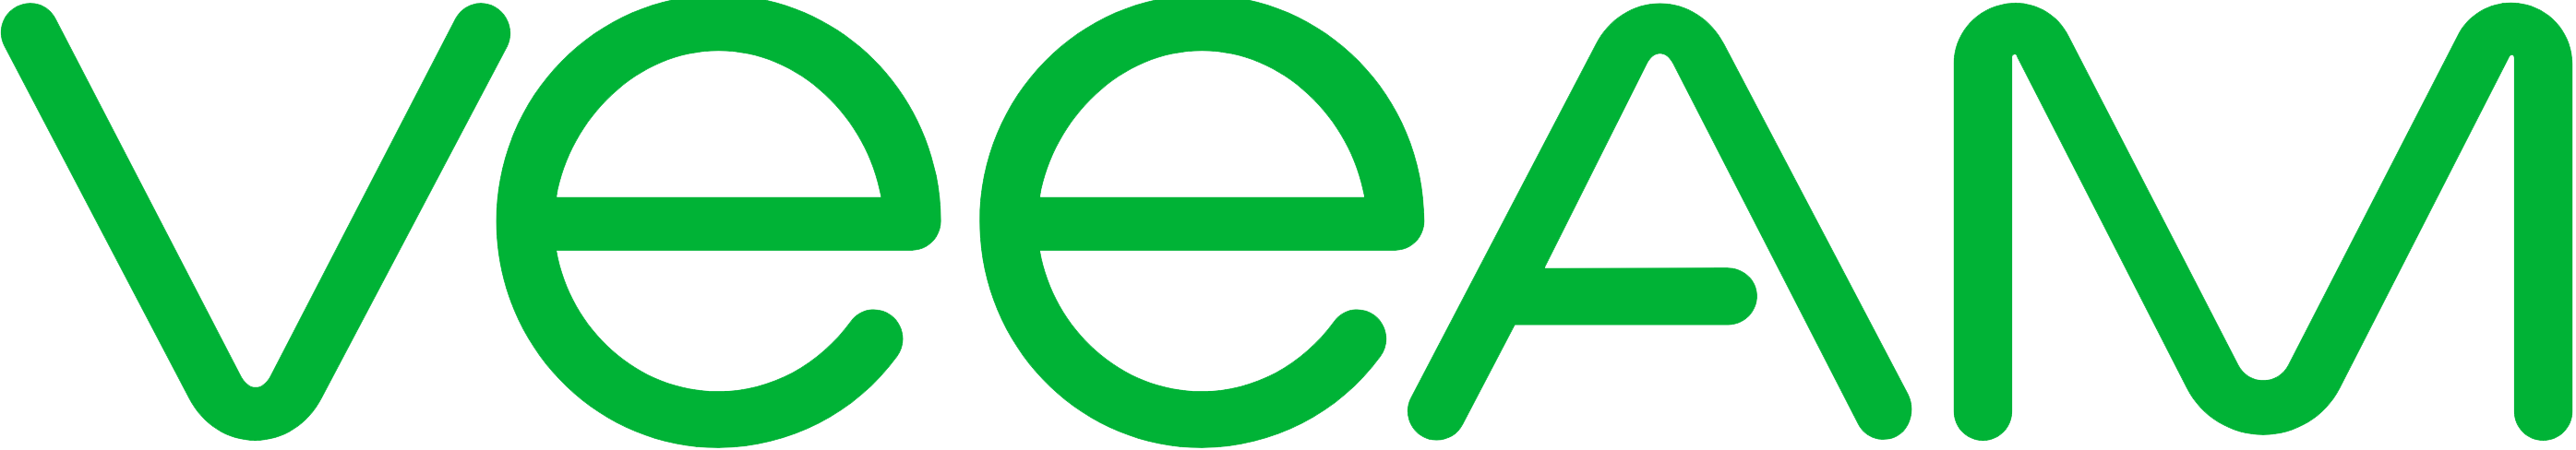 Veeam Is A Backup Solution That Simply Works - Veeam Partner Logo (2791x488)